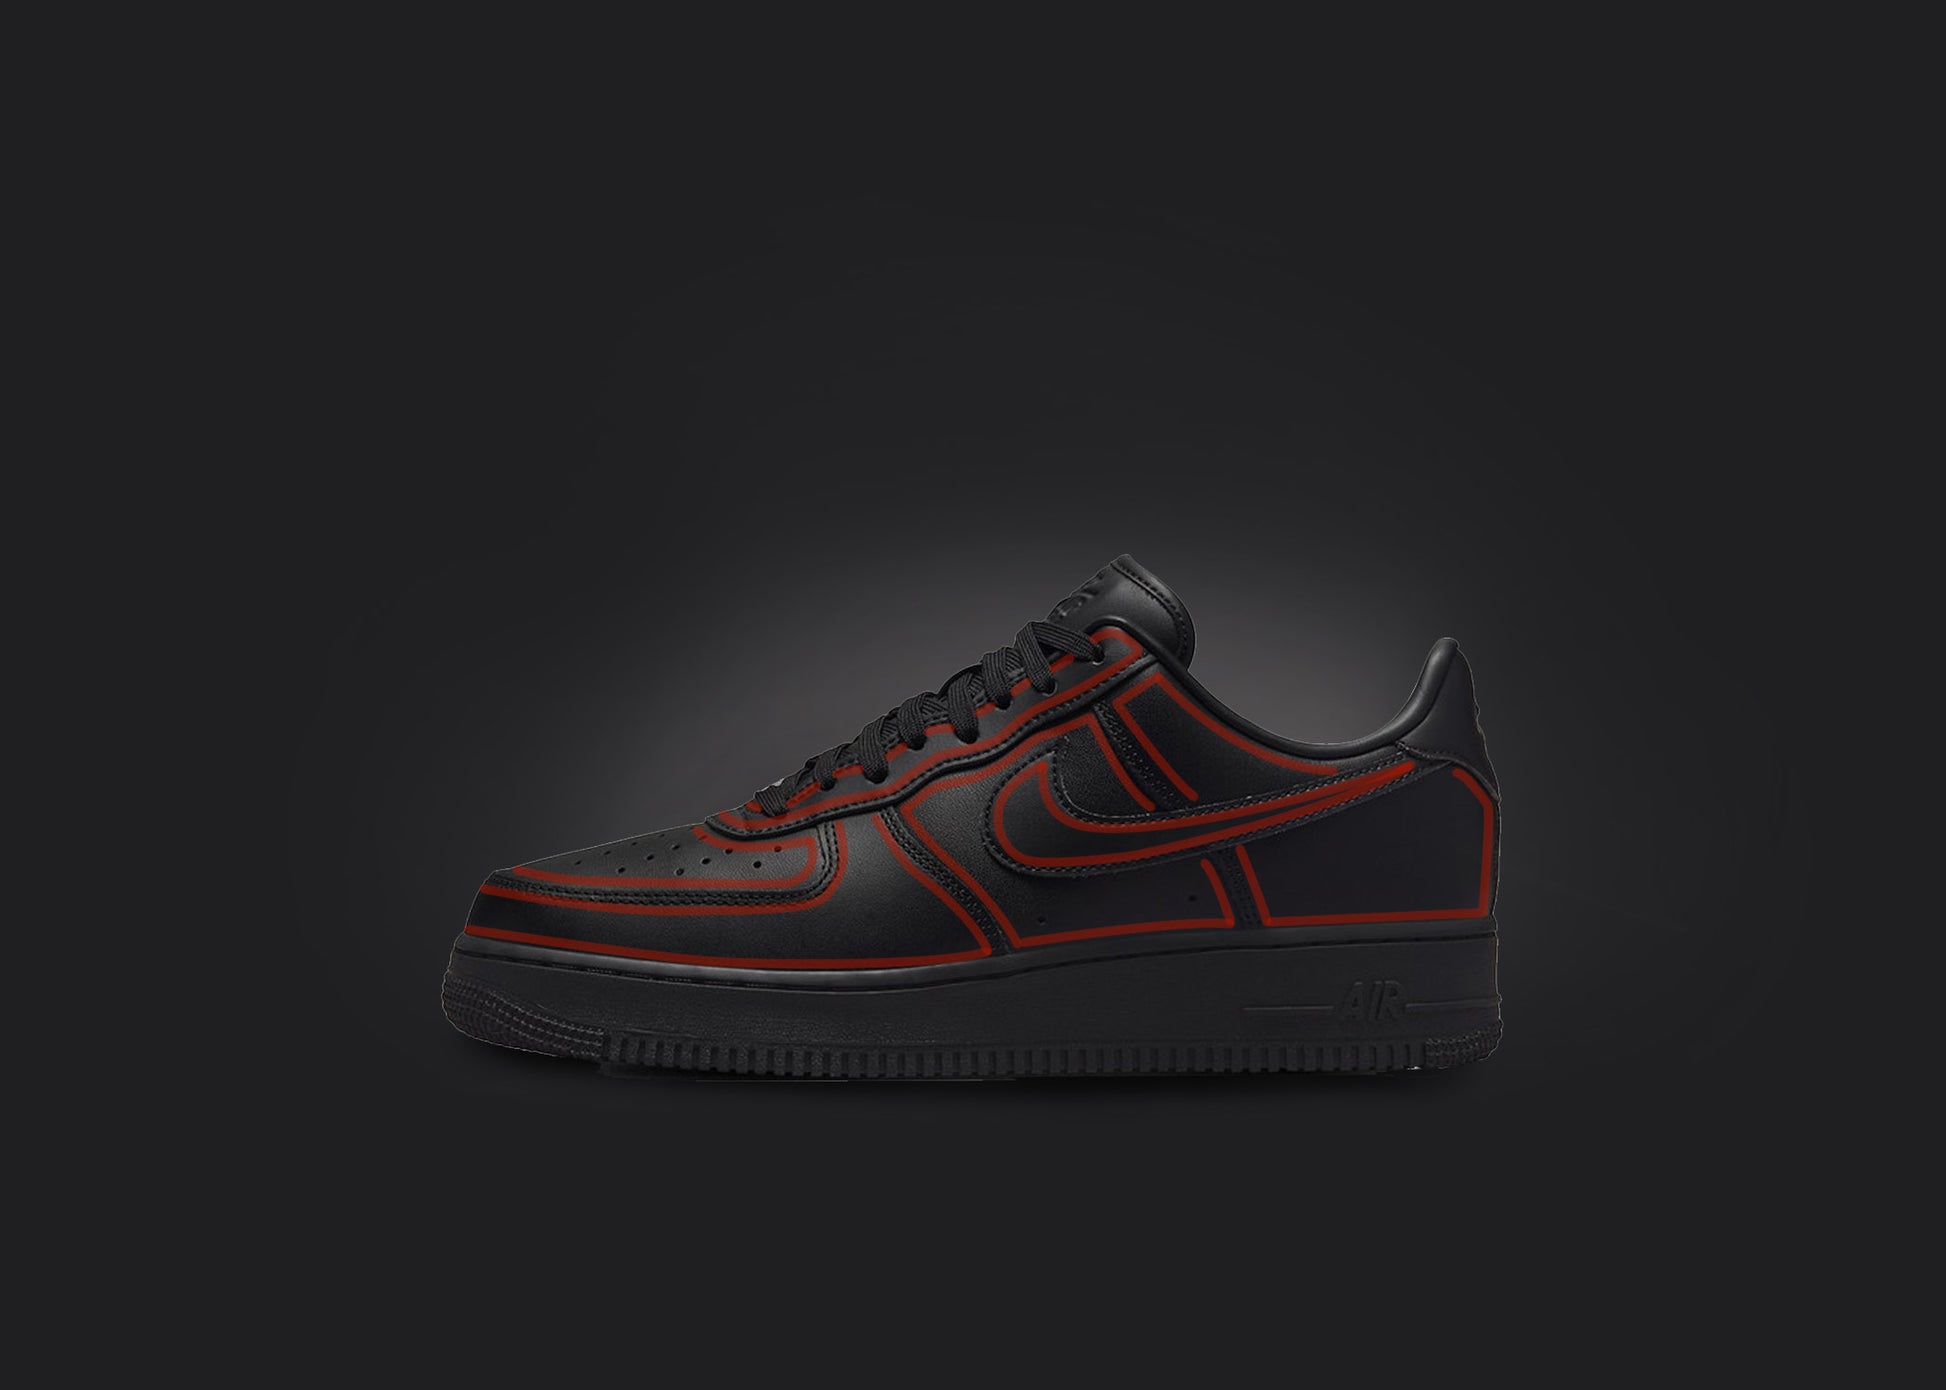 The image is featuring a custom black Air force 1 sneaker on a blank black background. The black nike sneaker has a red cartoon outline design all over the sneaker. 